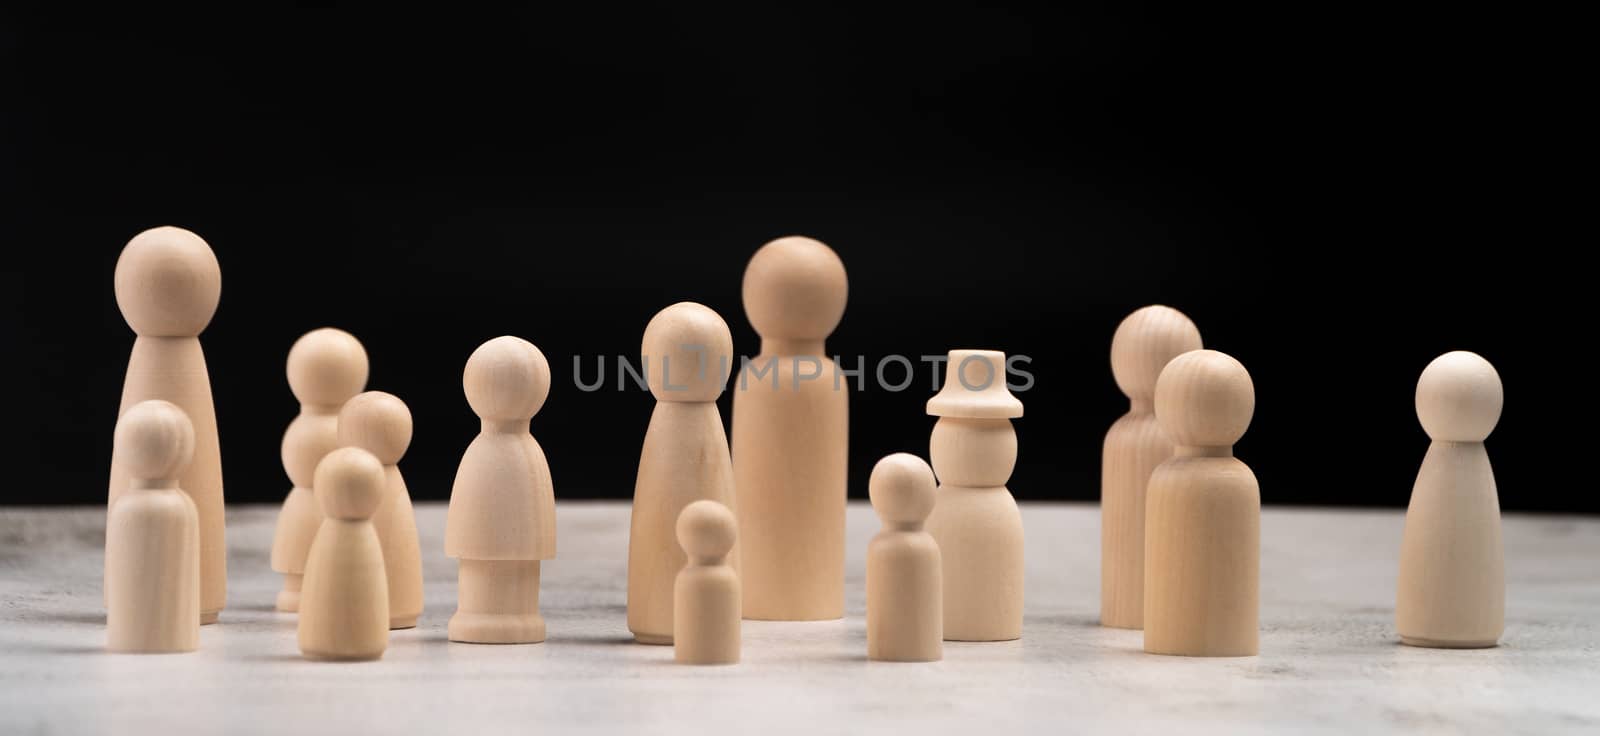 Many wooden human figures, Man and woman standing. Concept of Human resource, Talent management, Recruitment employee by PattyPhoto